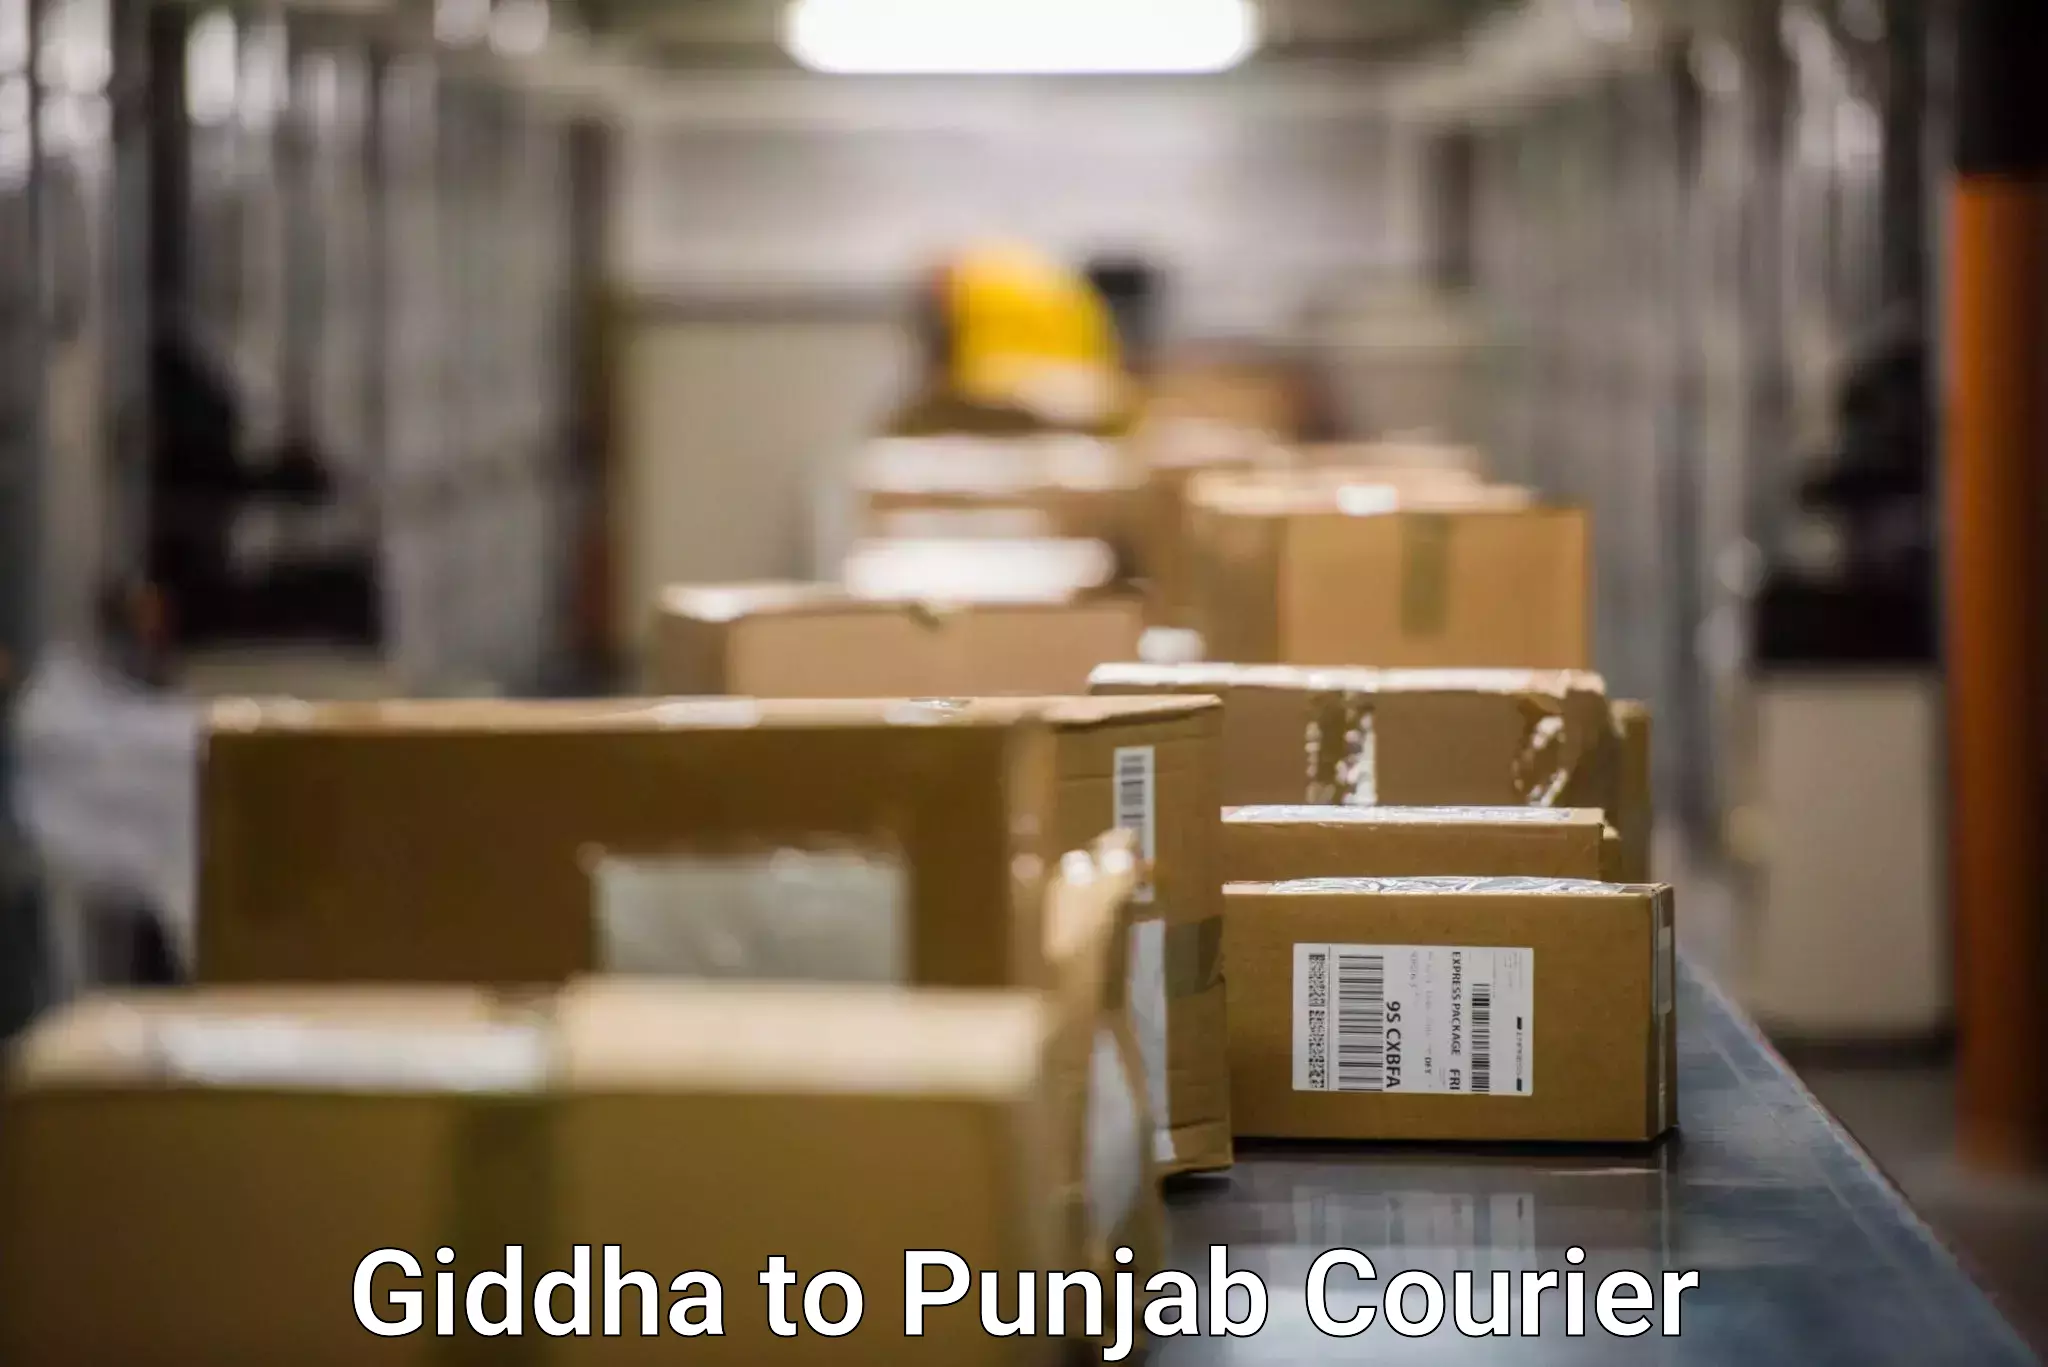 Reliable parcel services in Giddha to Amritsar